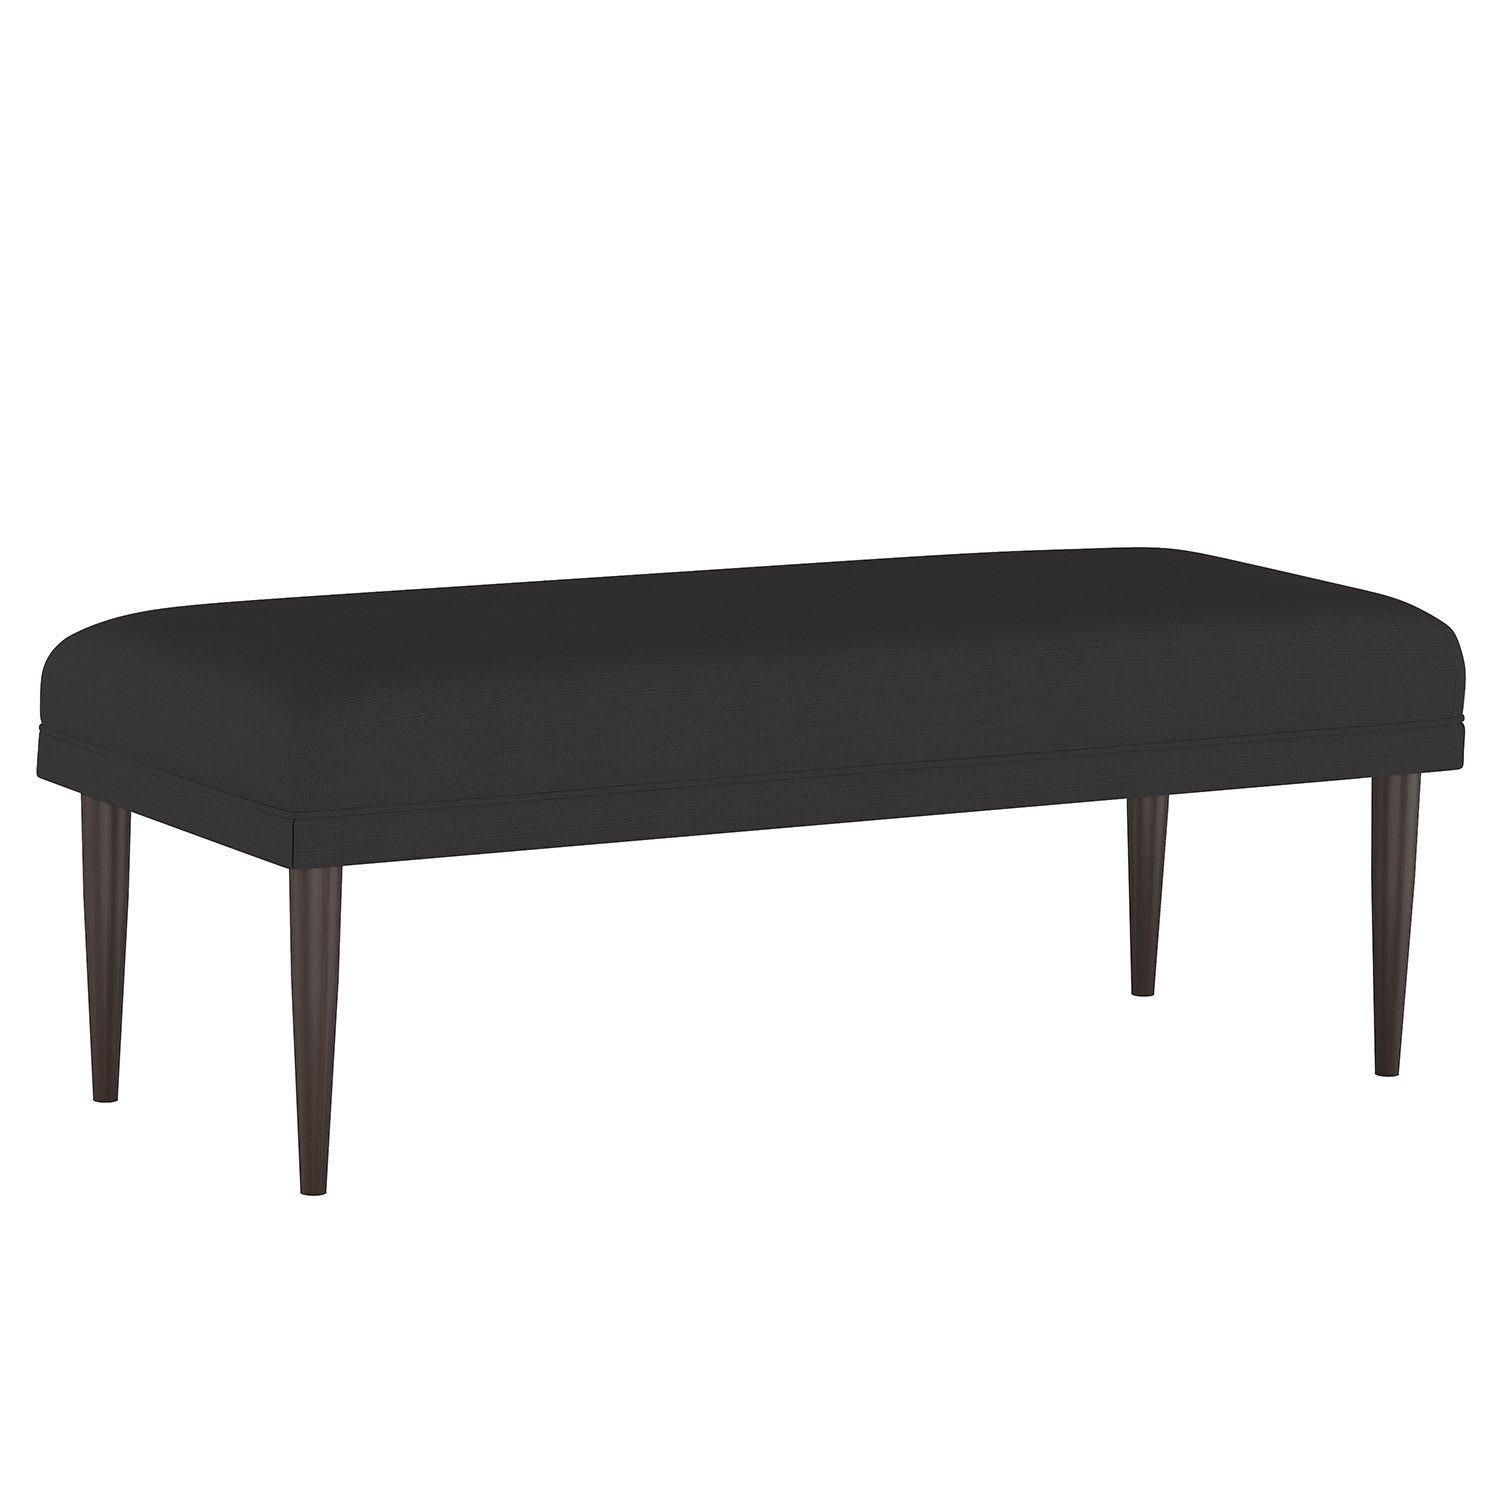 Alyse Linen Bench - Black, One Size, Linen | The Company Store | The Company Store